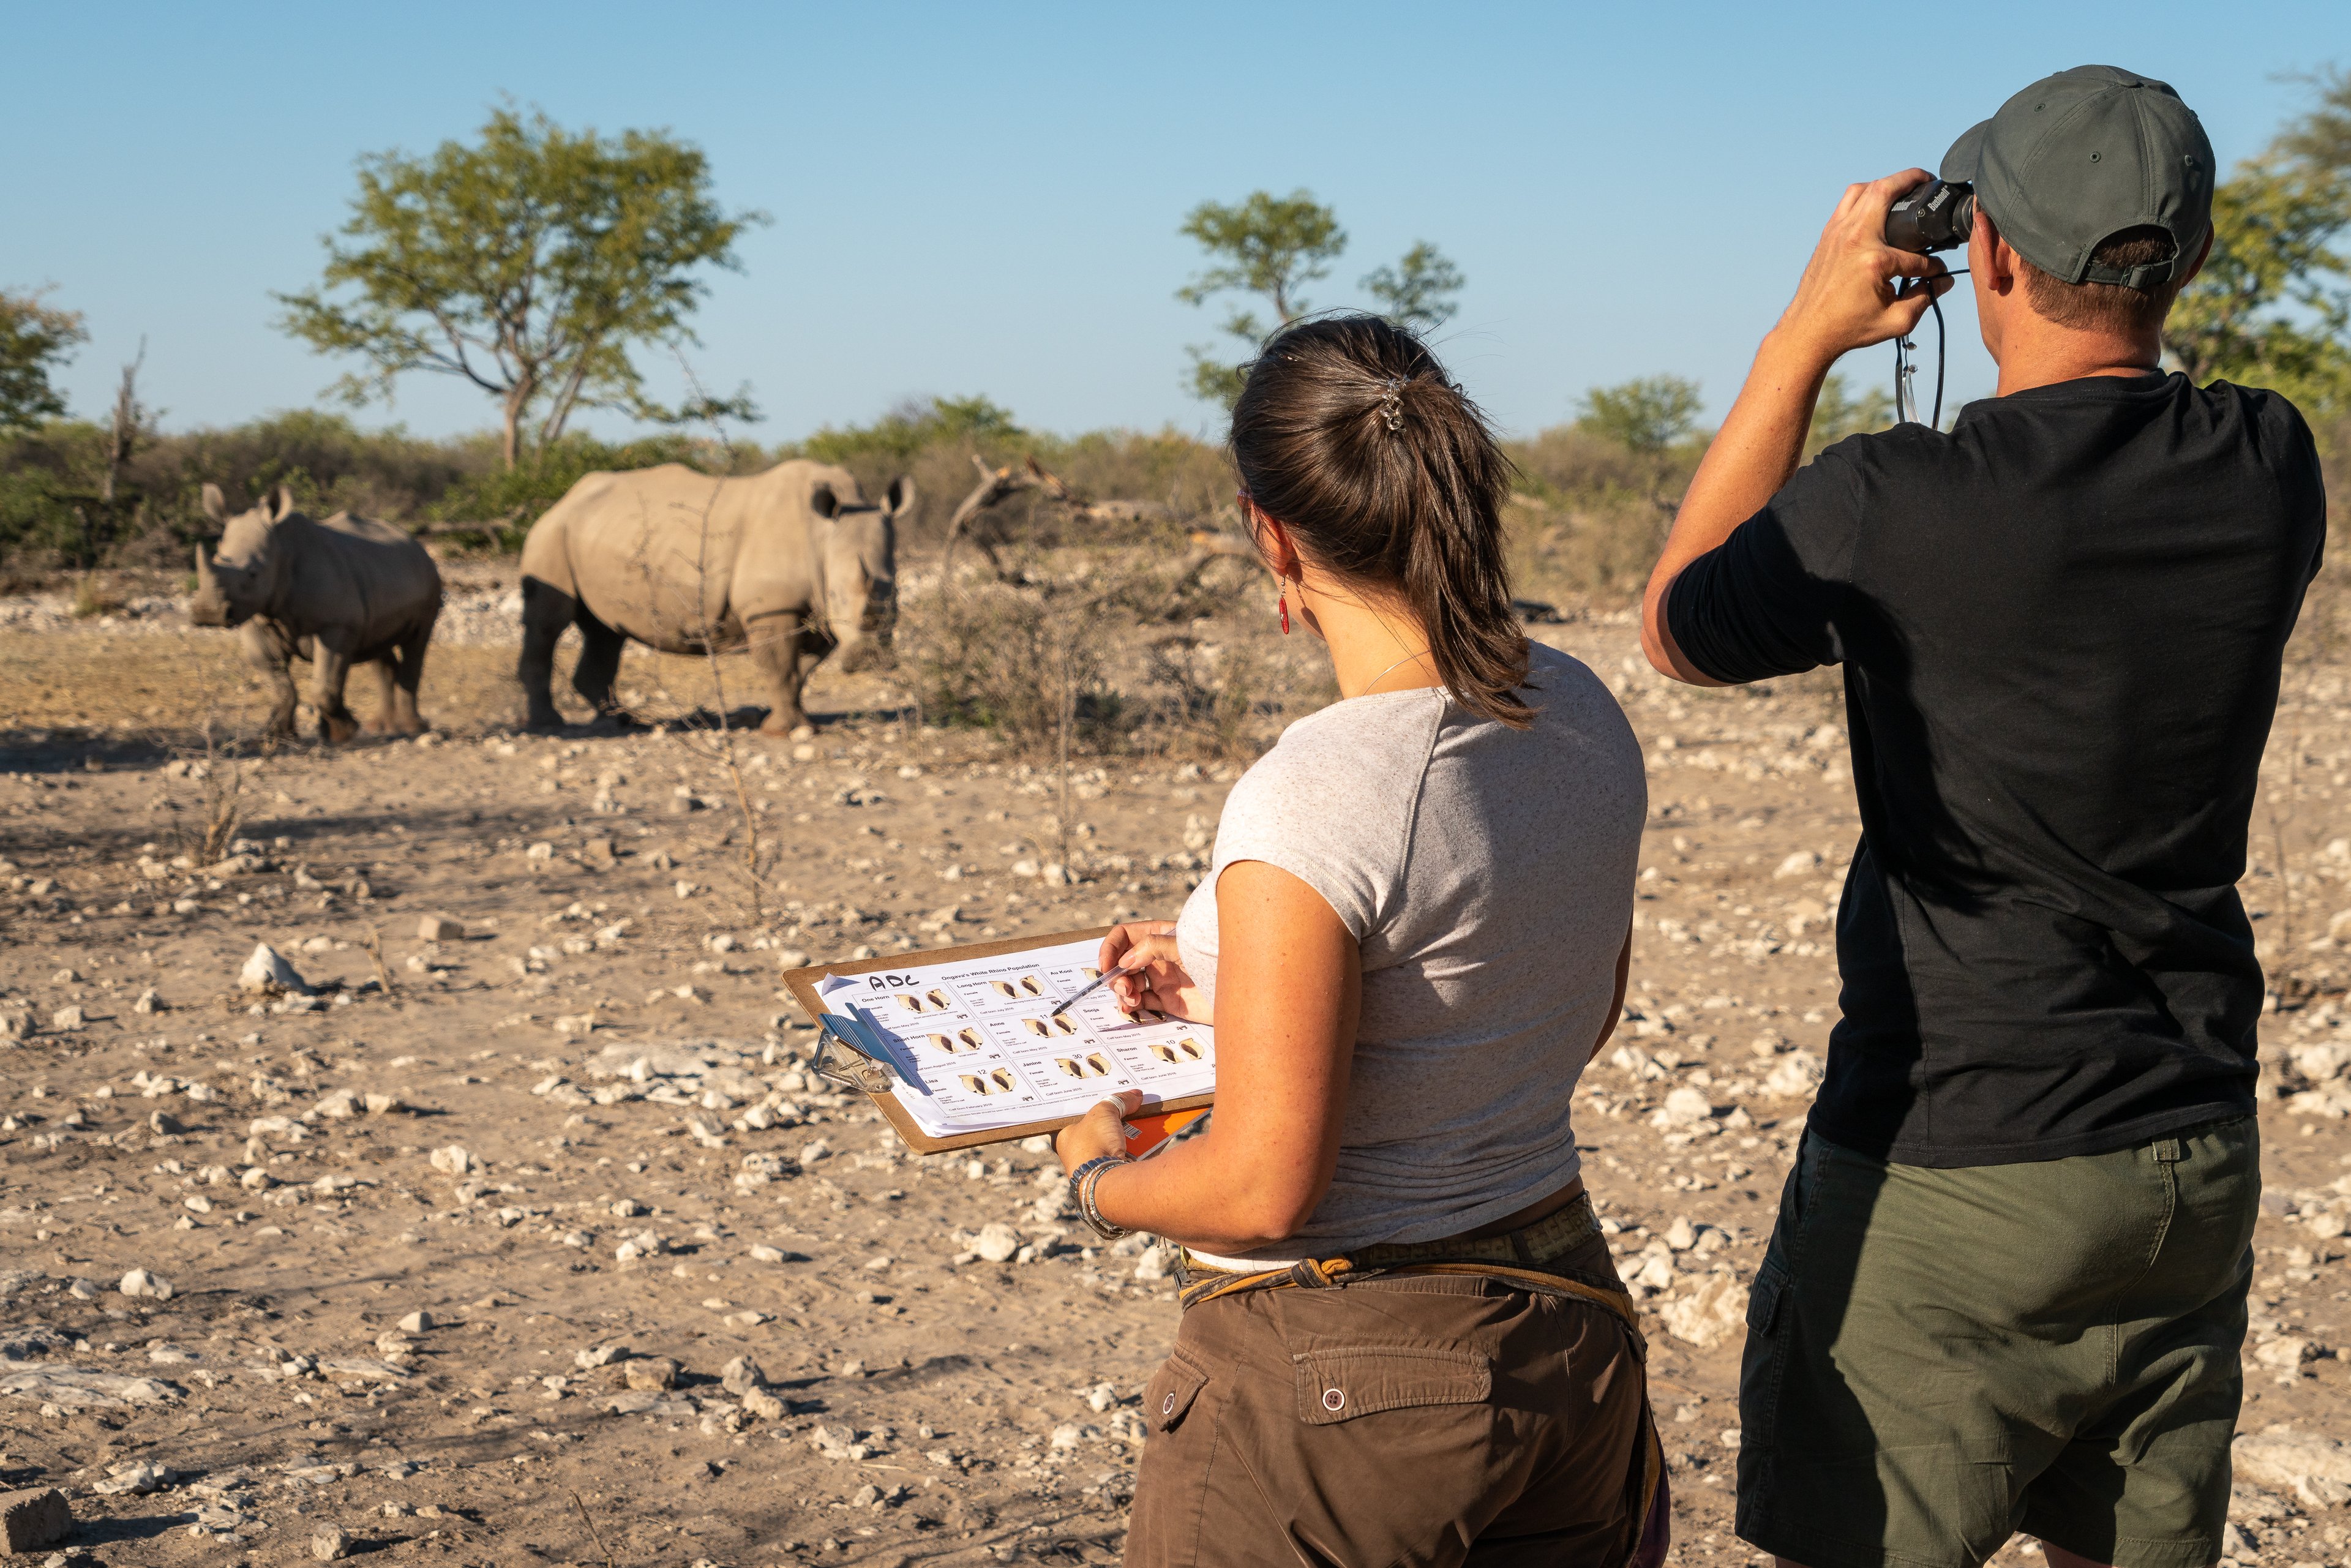 Every rhino at Ongava is carefully monitored to protect and conserve this threatened species. 